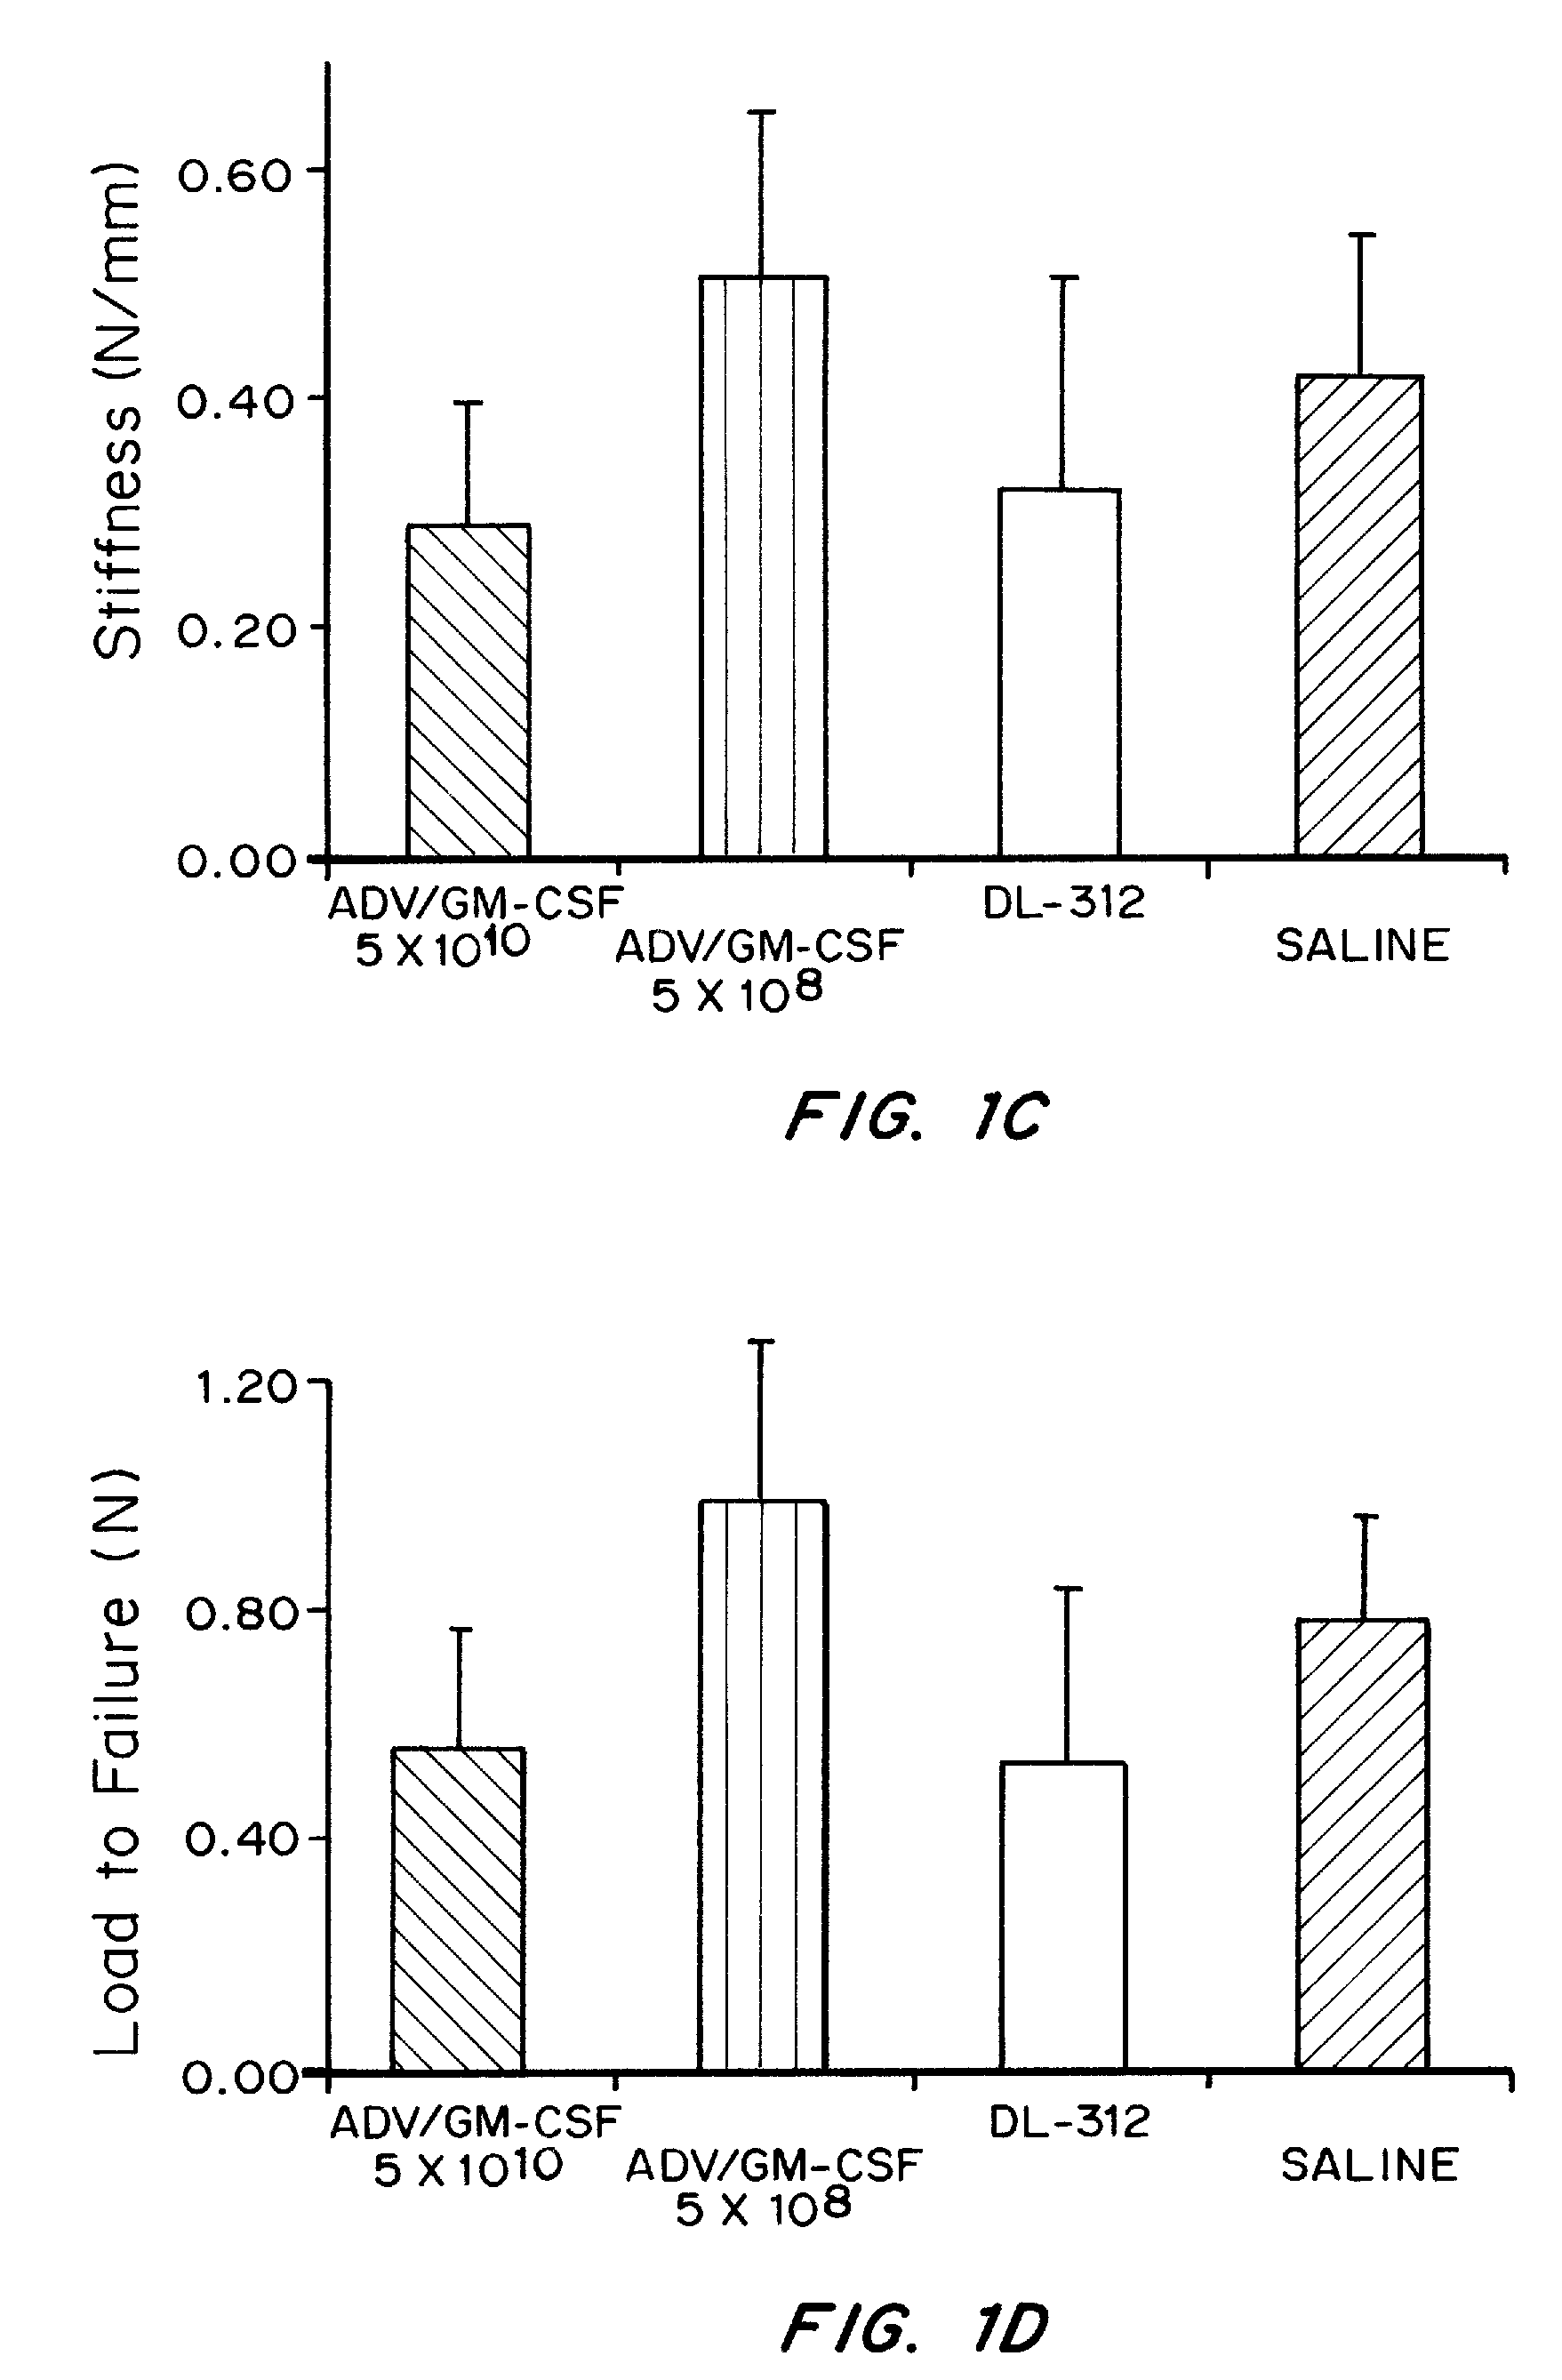 Gm-csf cosmeceutical compositions and methods of use thereof